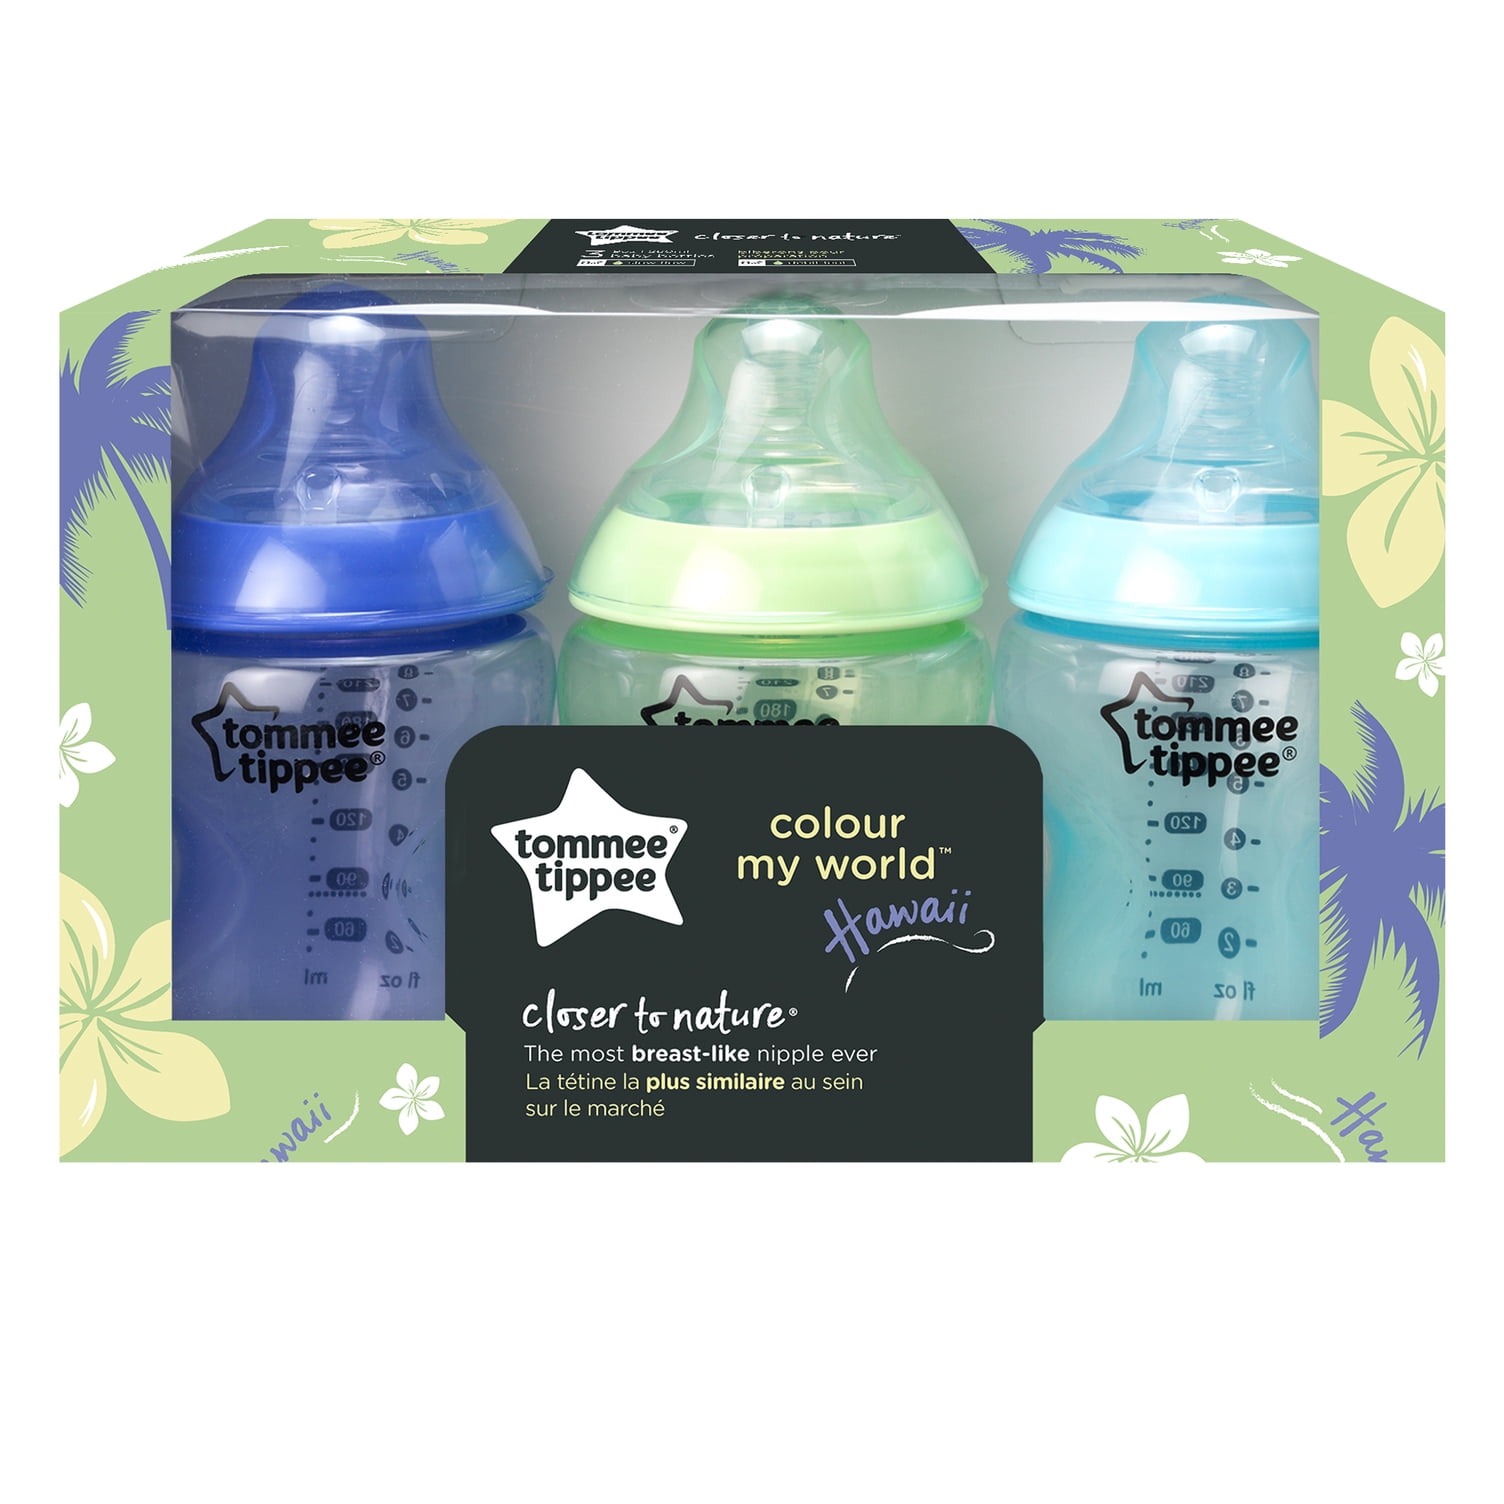 Tommee Tippee Closer to Nature Colour 